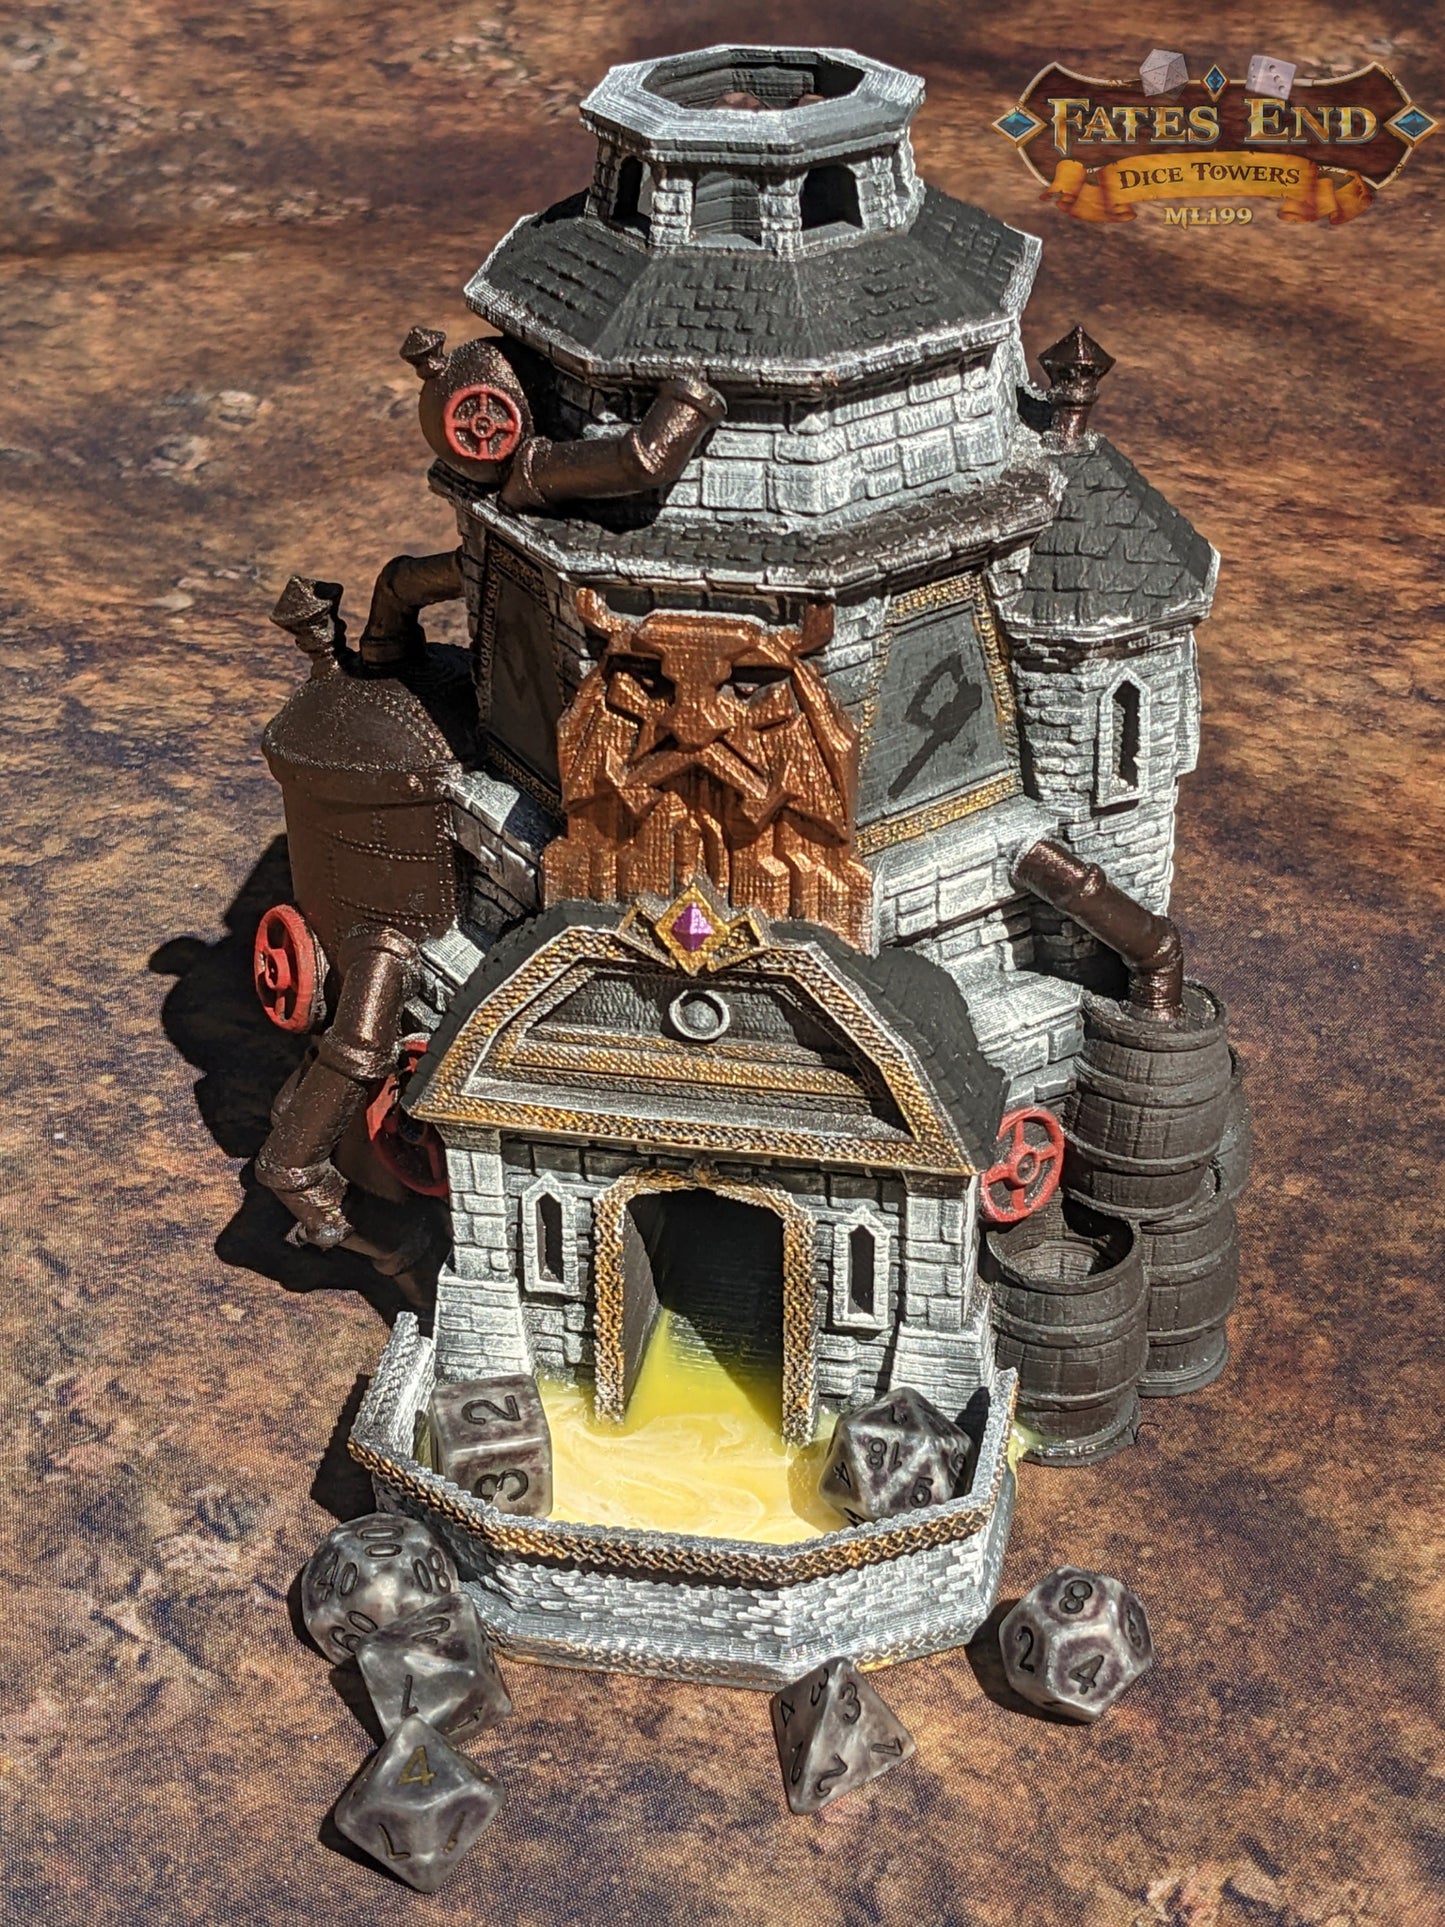 Dwarven Brewery Dice Tower - Fate's End Collection - Pour Forth Legendary Rolls Amidst Ale-Infused Anvils.